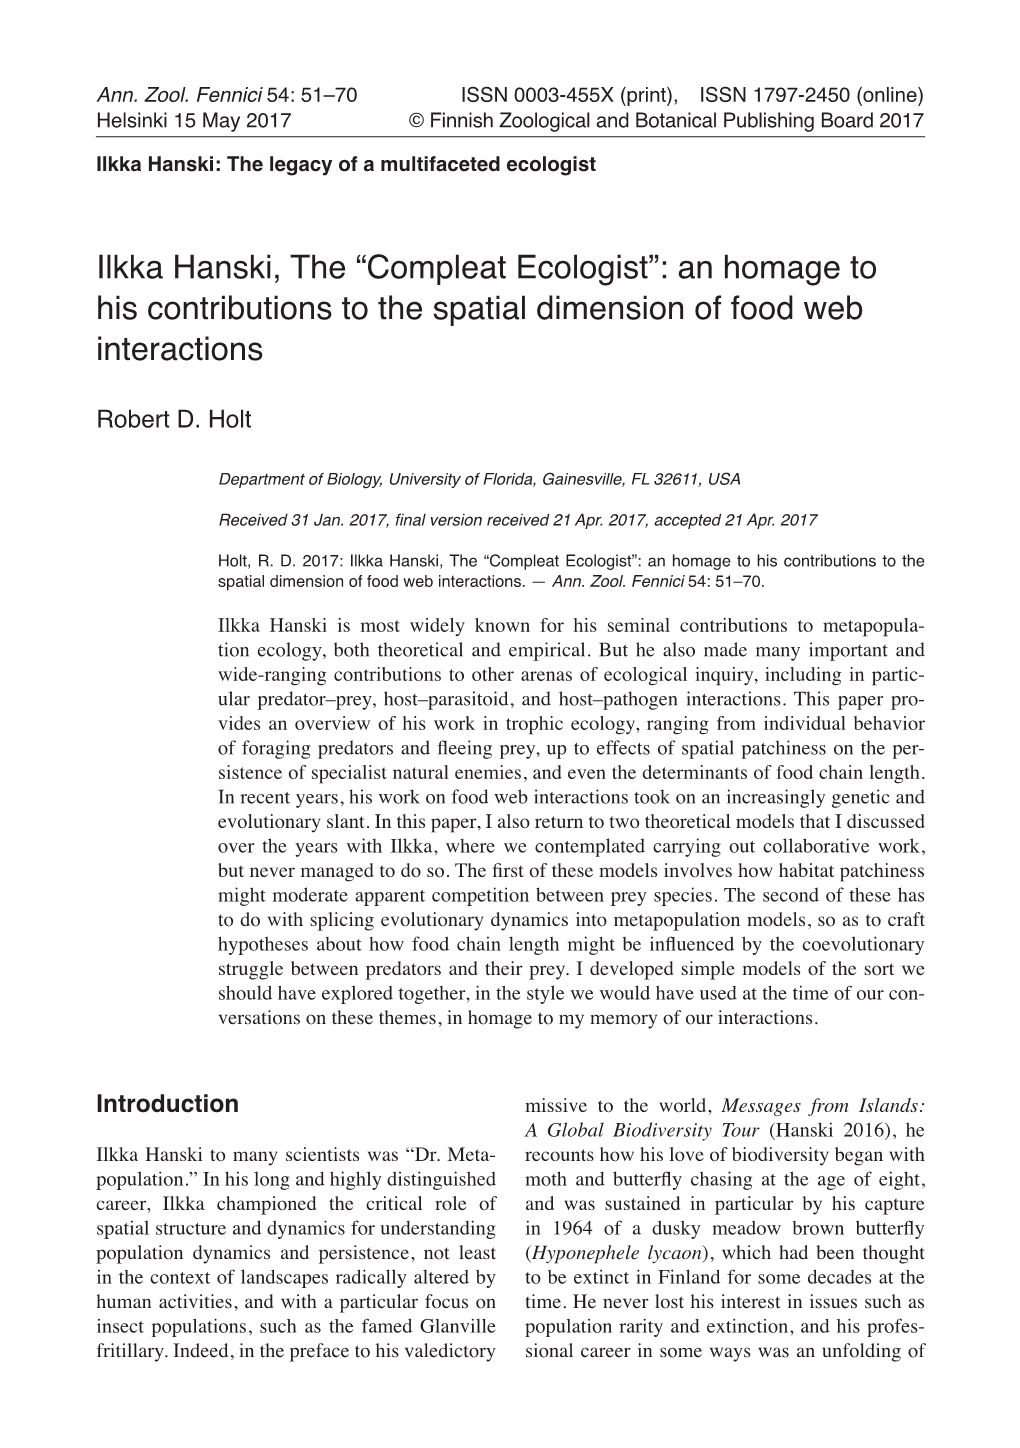 Ilkka Hanski, the “Compleat Ecologist”: an Homage to His Contributions to the Spatial Dimension of Food Web Interactions